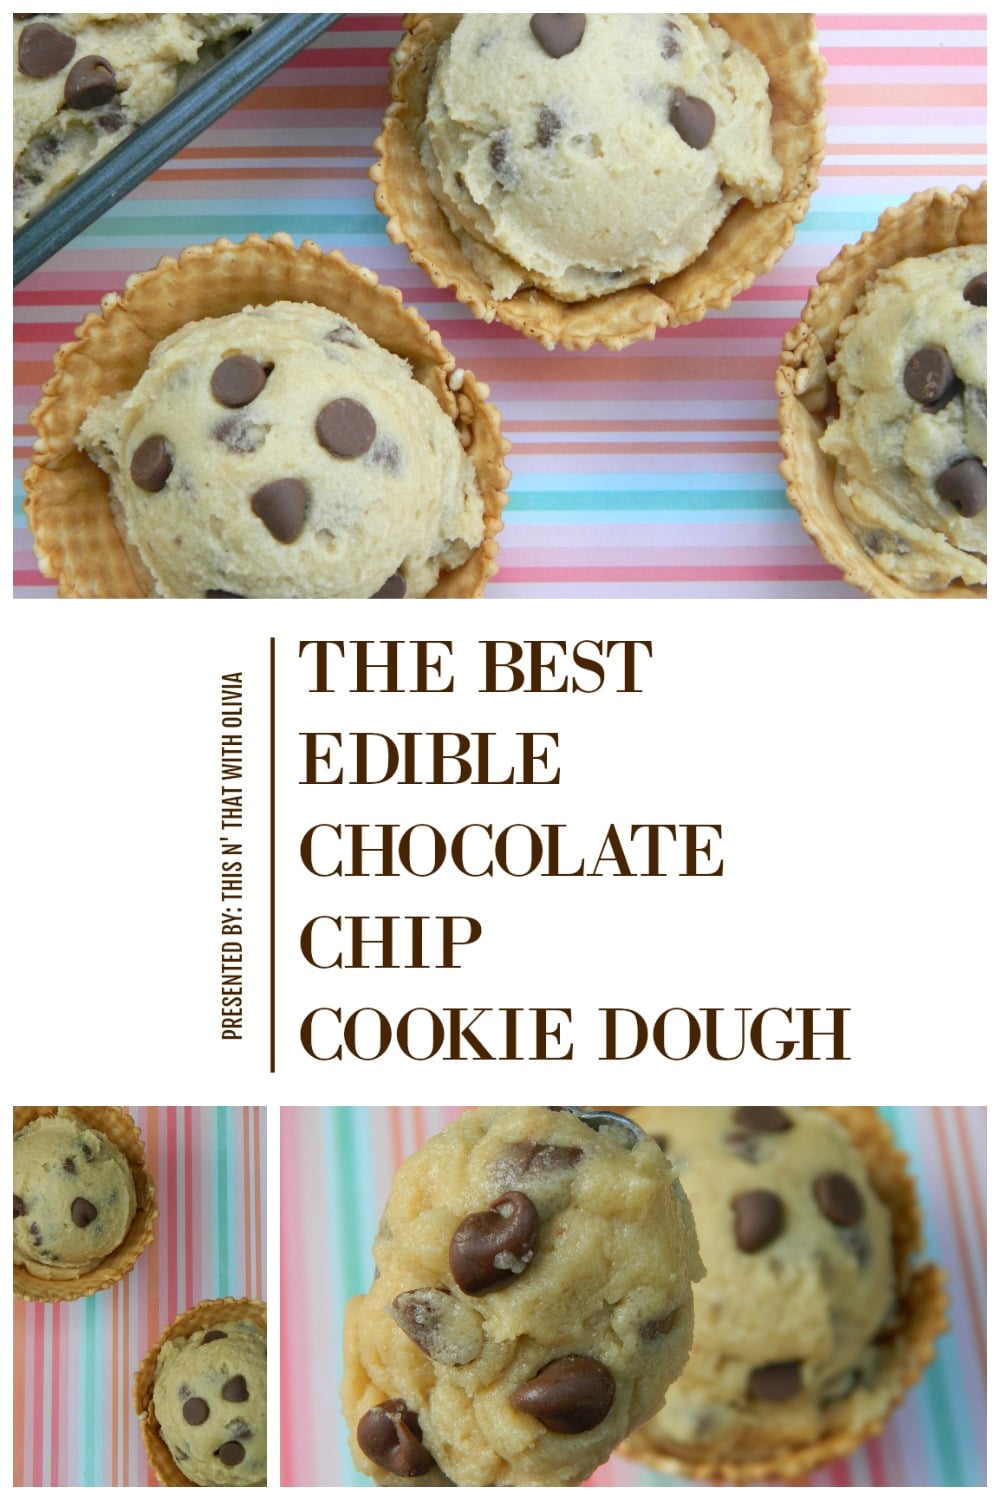 The Best Edible Chocolate Chip Cookie Dough!